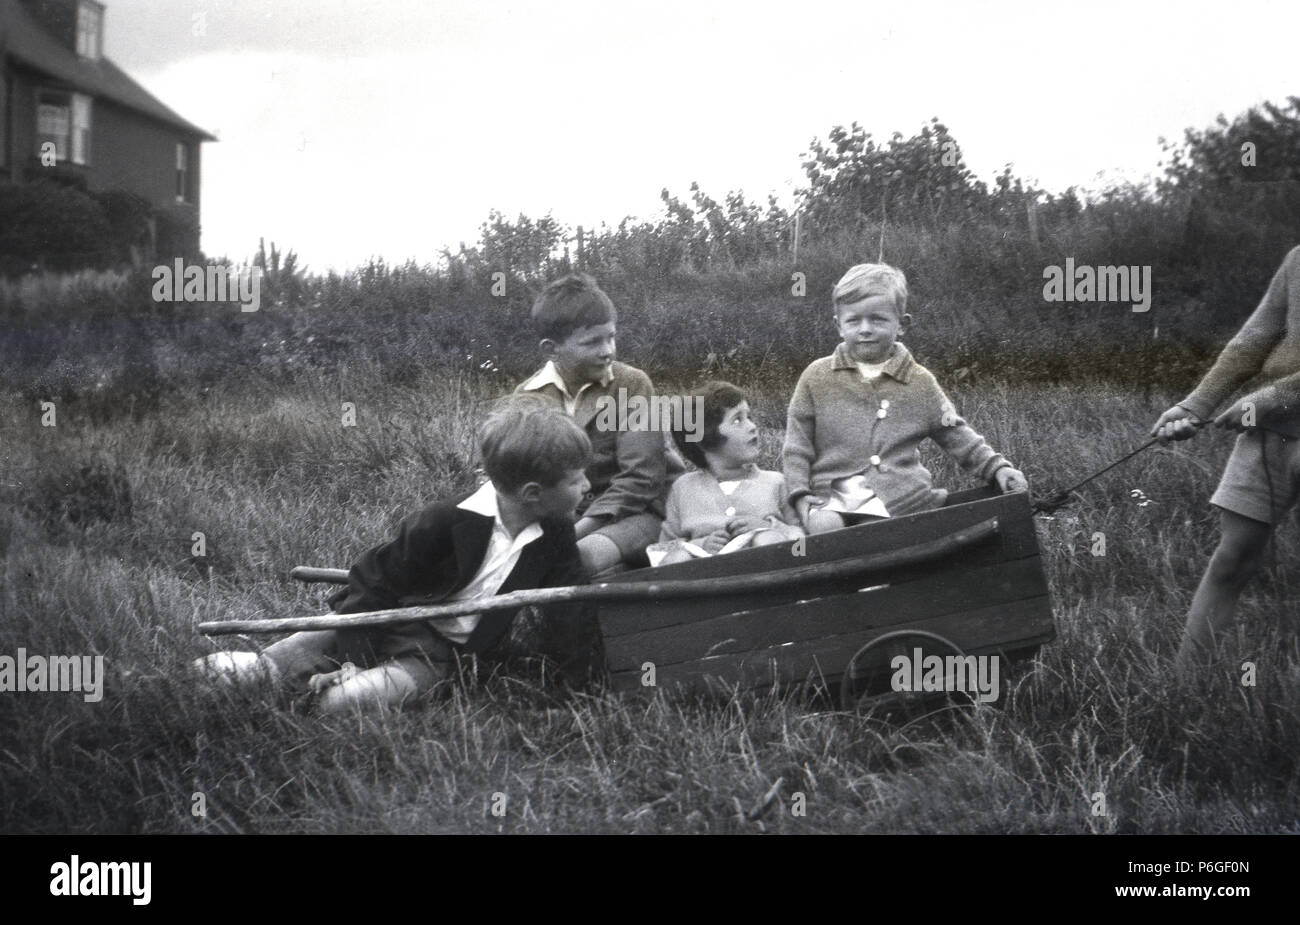 1950s, children outdoors in a grassy field sitting together in a small wooden handcart, England, UK. In this, era children had the freedom to play and roam outside, unsupervised, for hours on end and parks, fields, common land were places to play and have adventures with your friends. Stock Photo